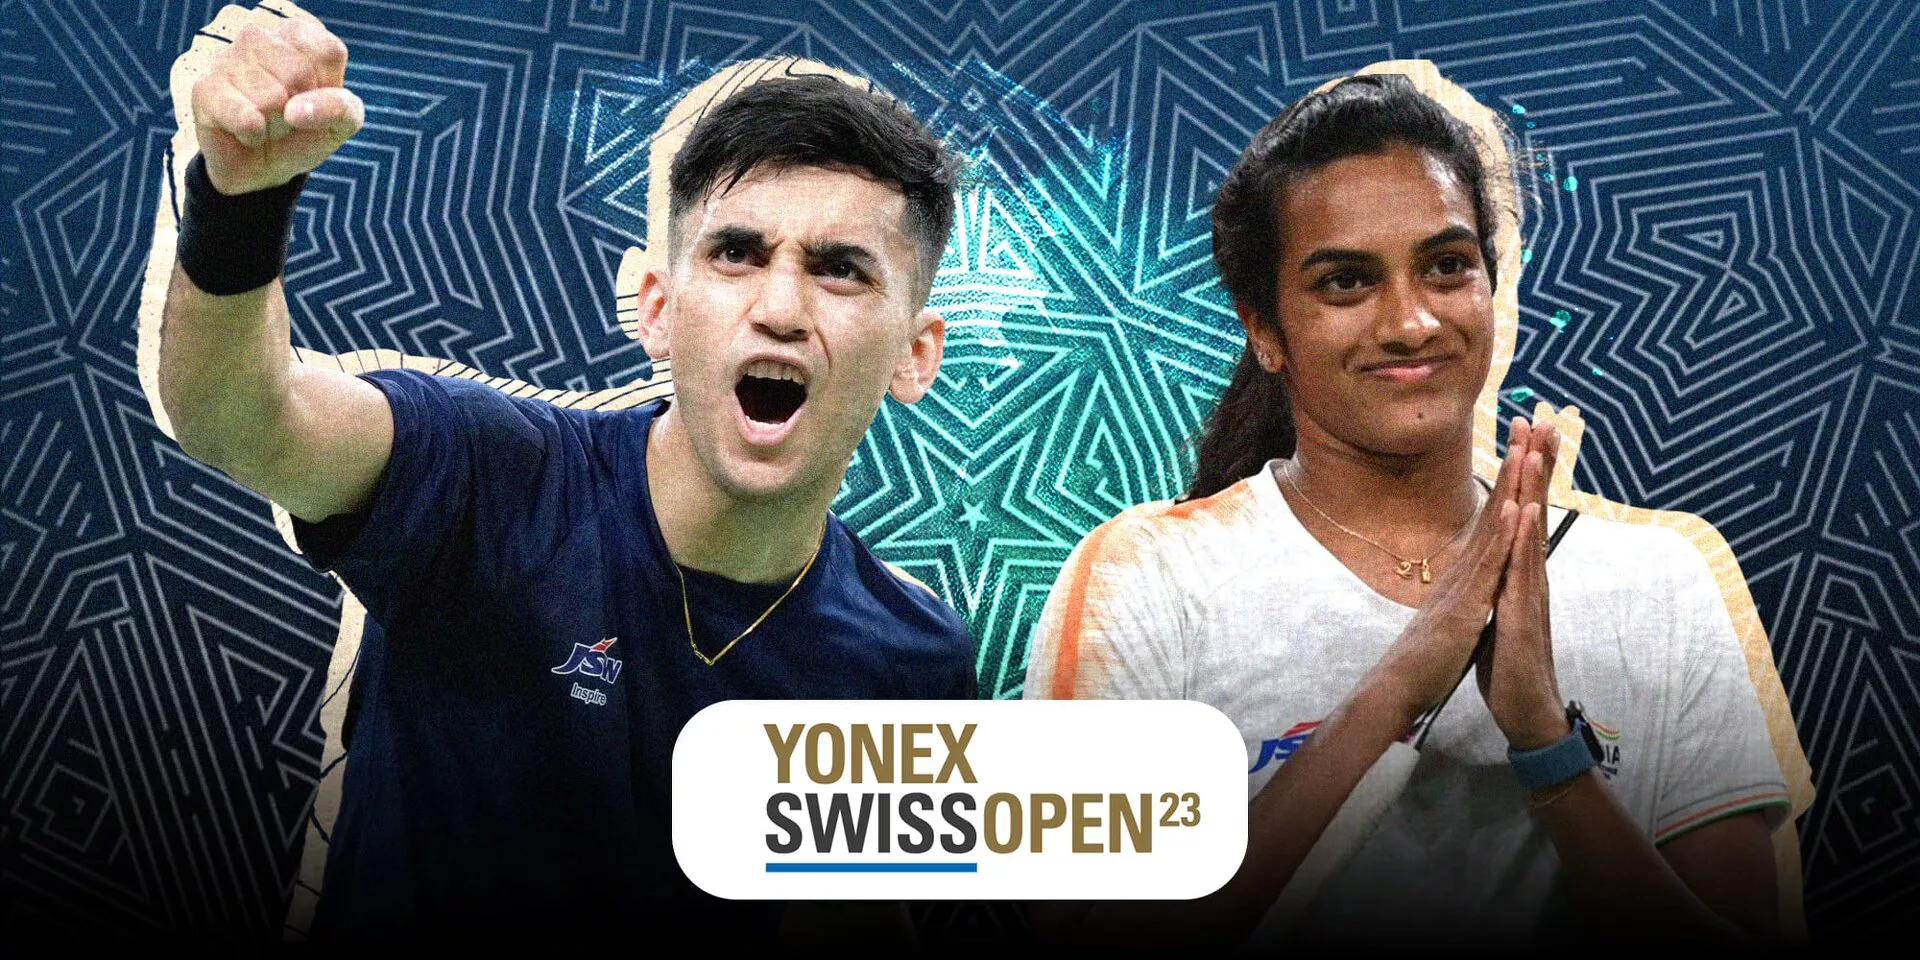 Swiss Open 2023 Updated schedule, fixtures, results and live streaming details